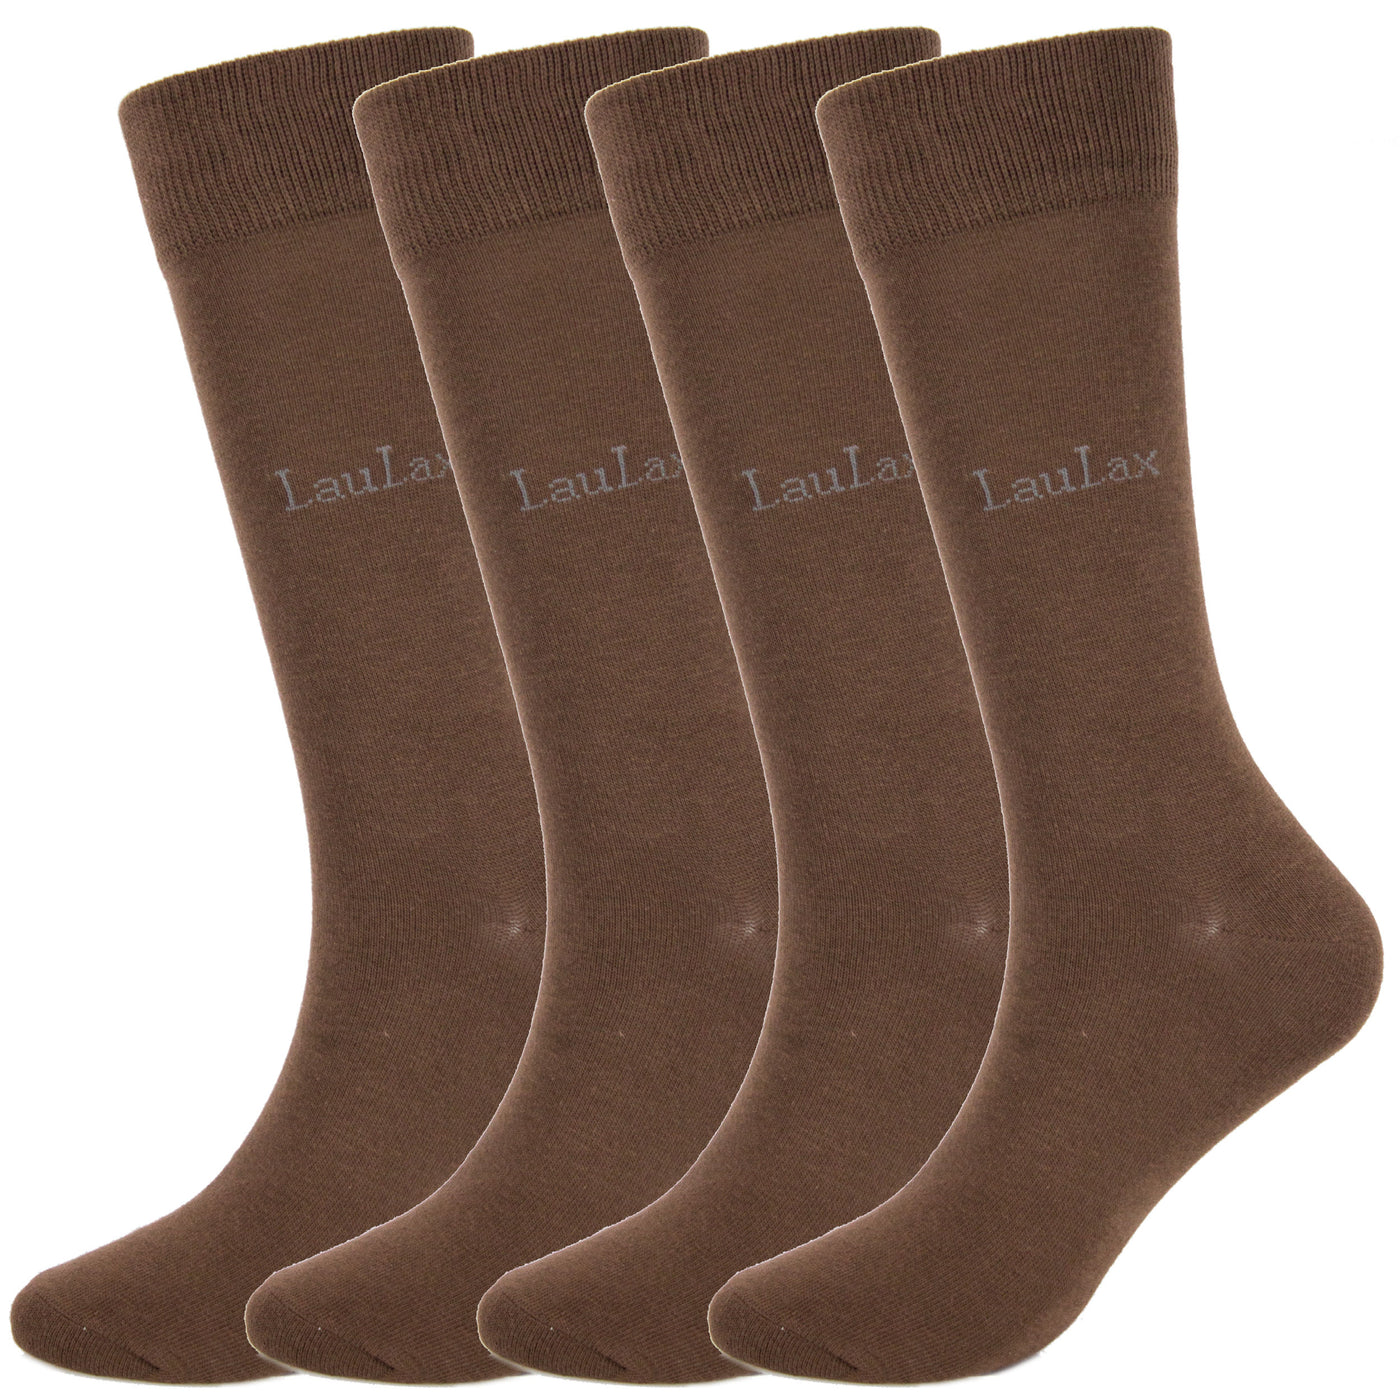 4 Pairs Finest Combed Cotton Smooth Seamless Toe Business Socks, Coffee, Gift Set